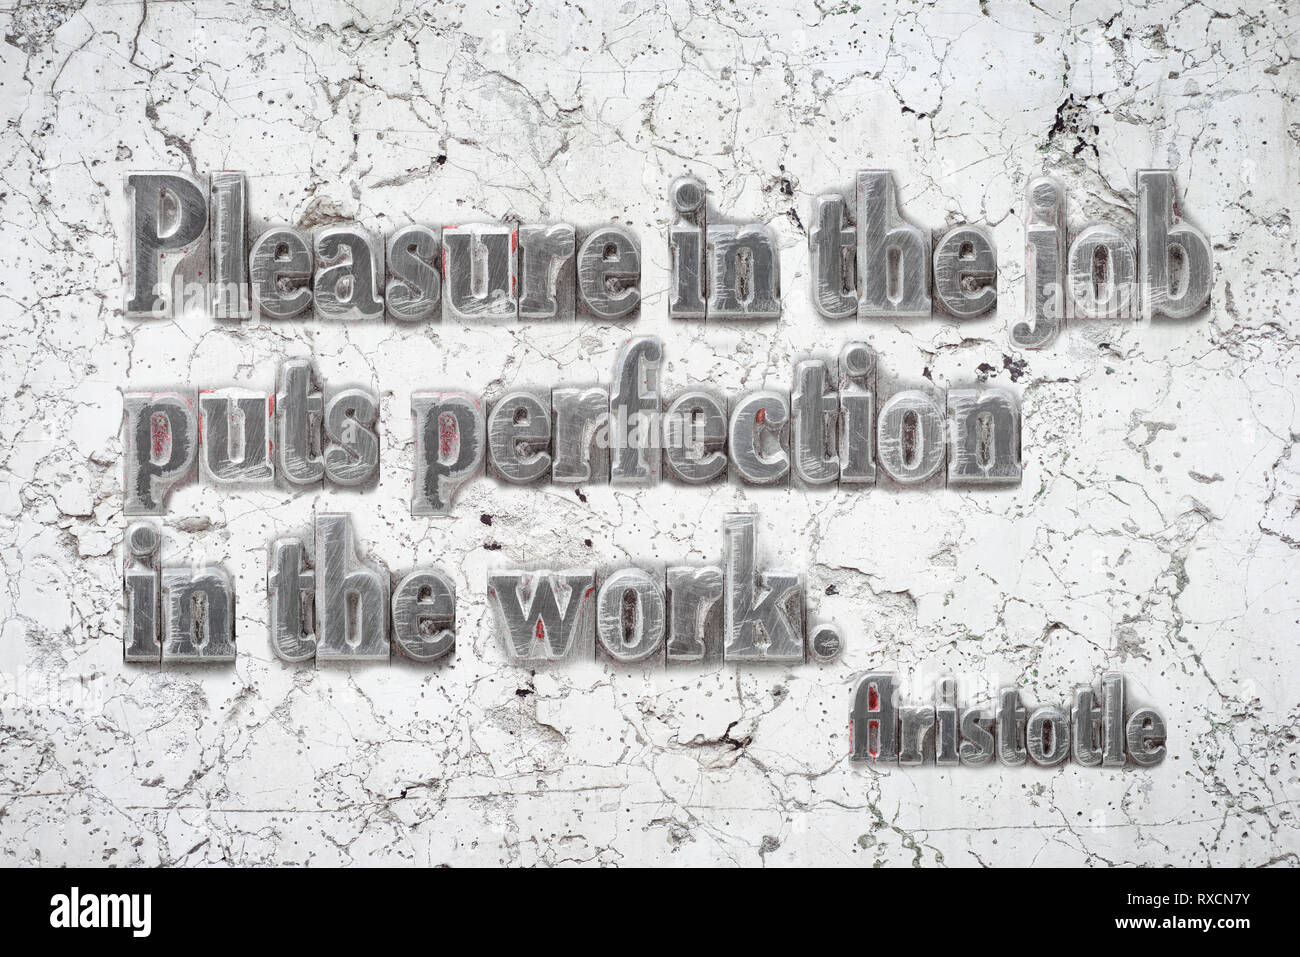 Pleasure in the job - ancient Greek philosopher Aristotle quote mounted on white marble wall Stock Photo